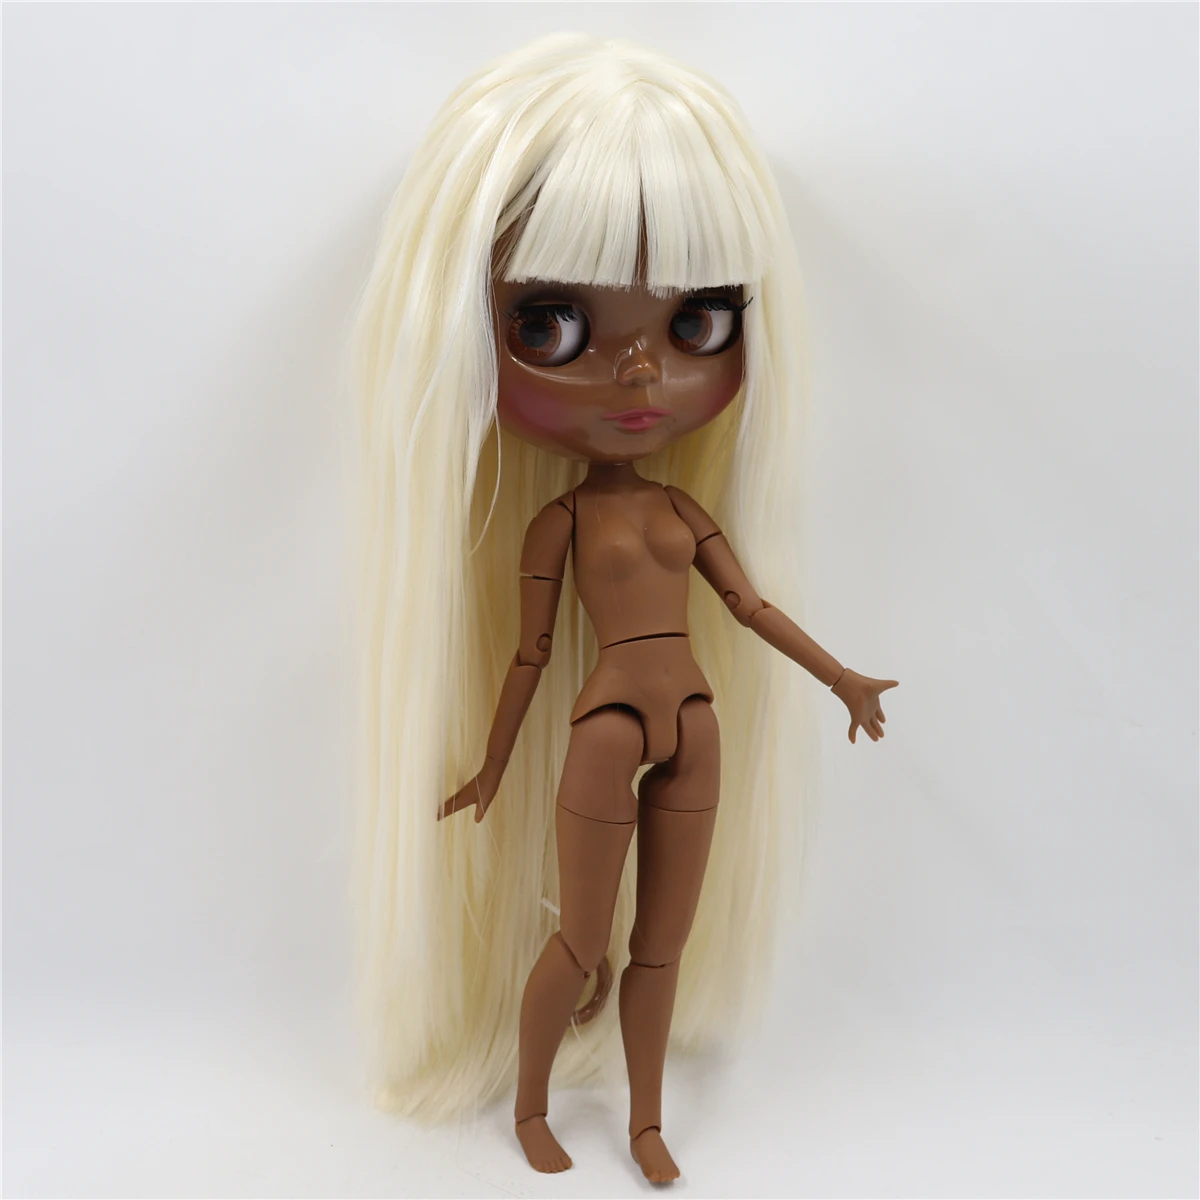 Neo Blythe Doll with Blonde Hair, Black Skin, Shiny Cute Face & Factory Jointed Body 4